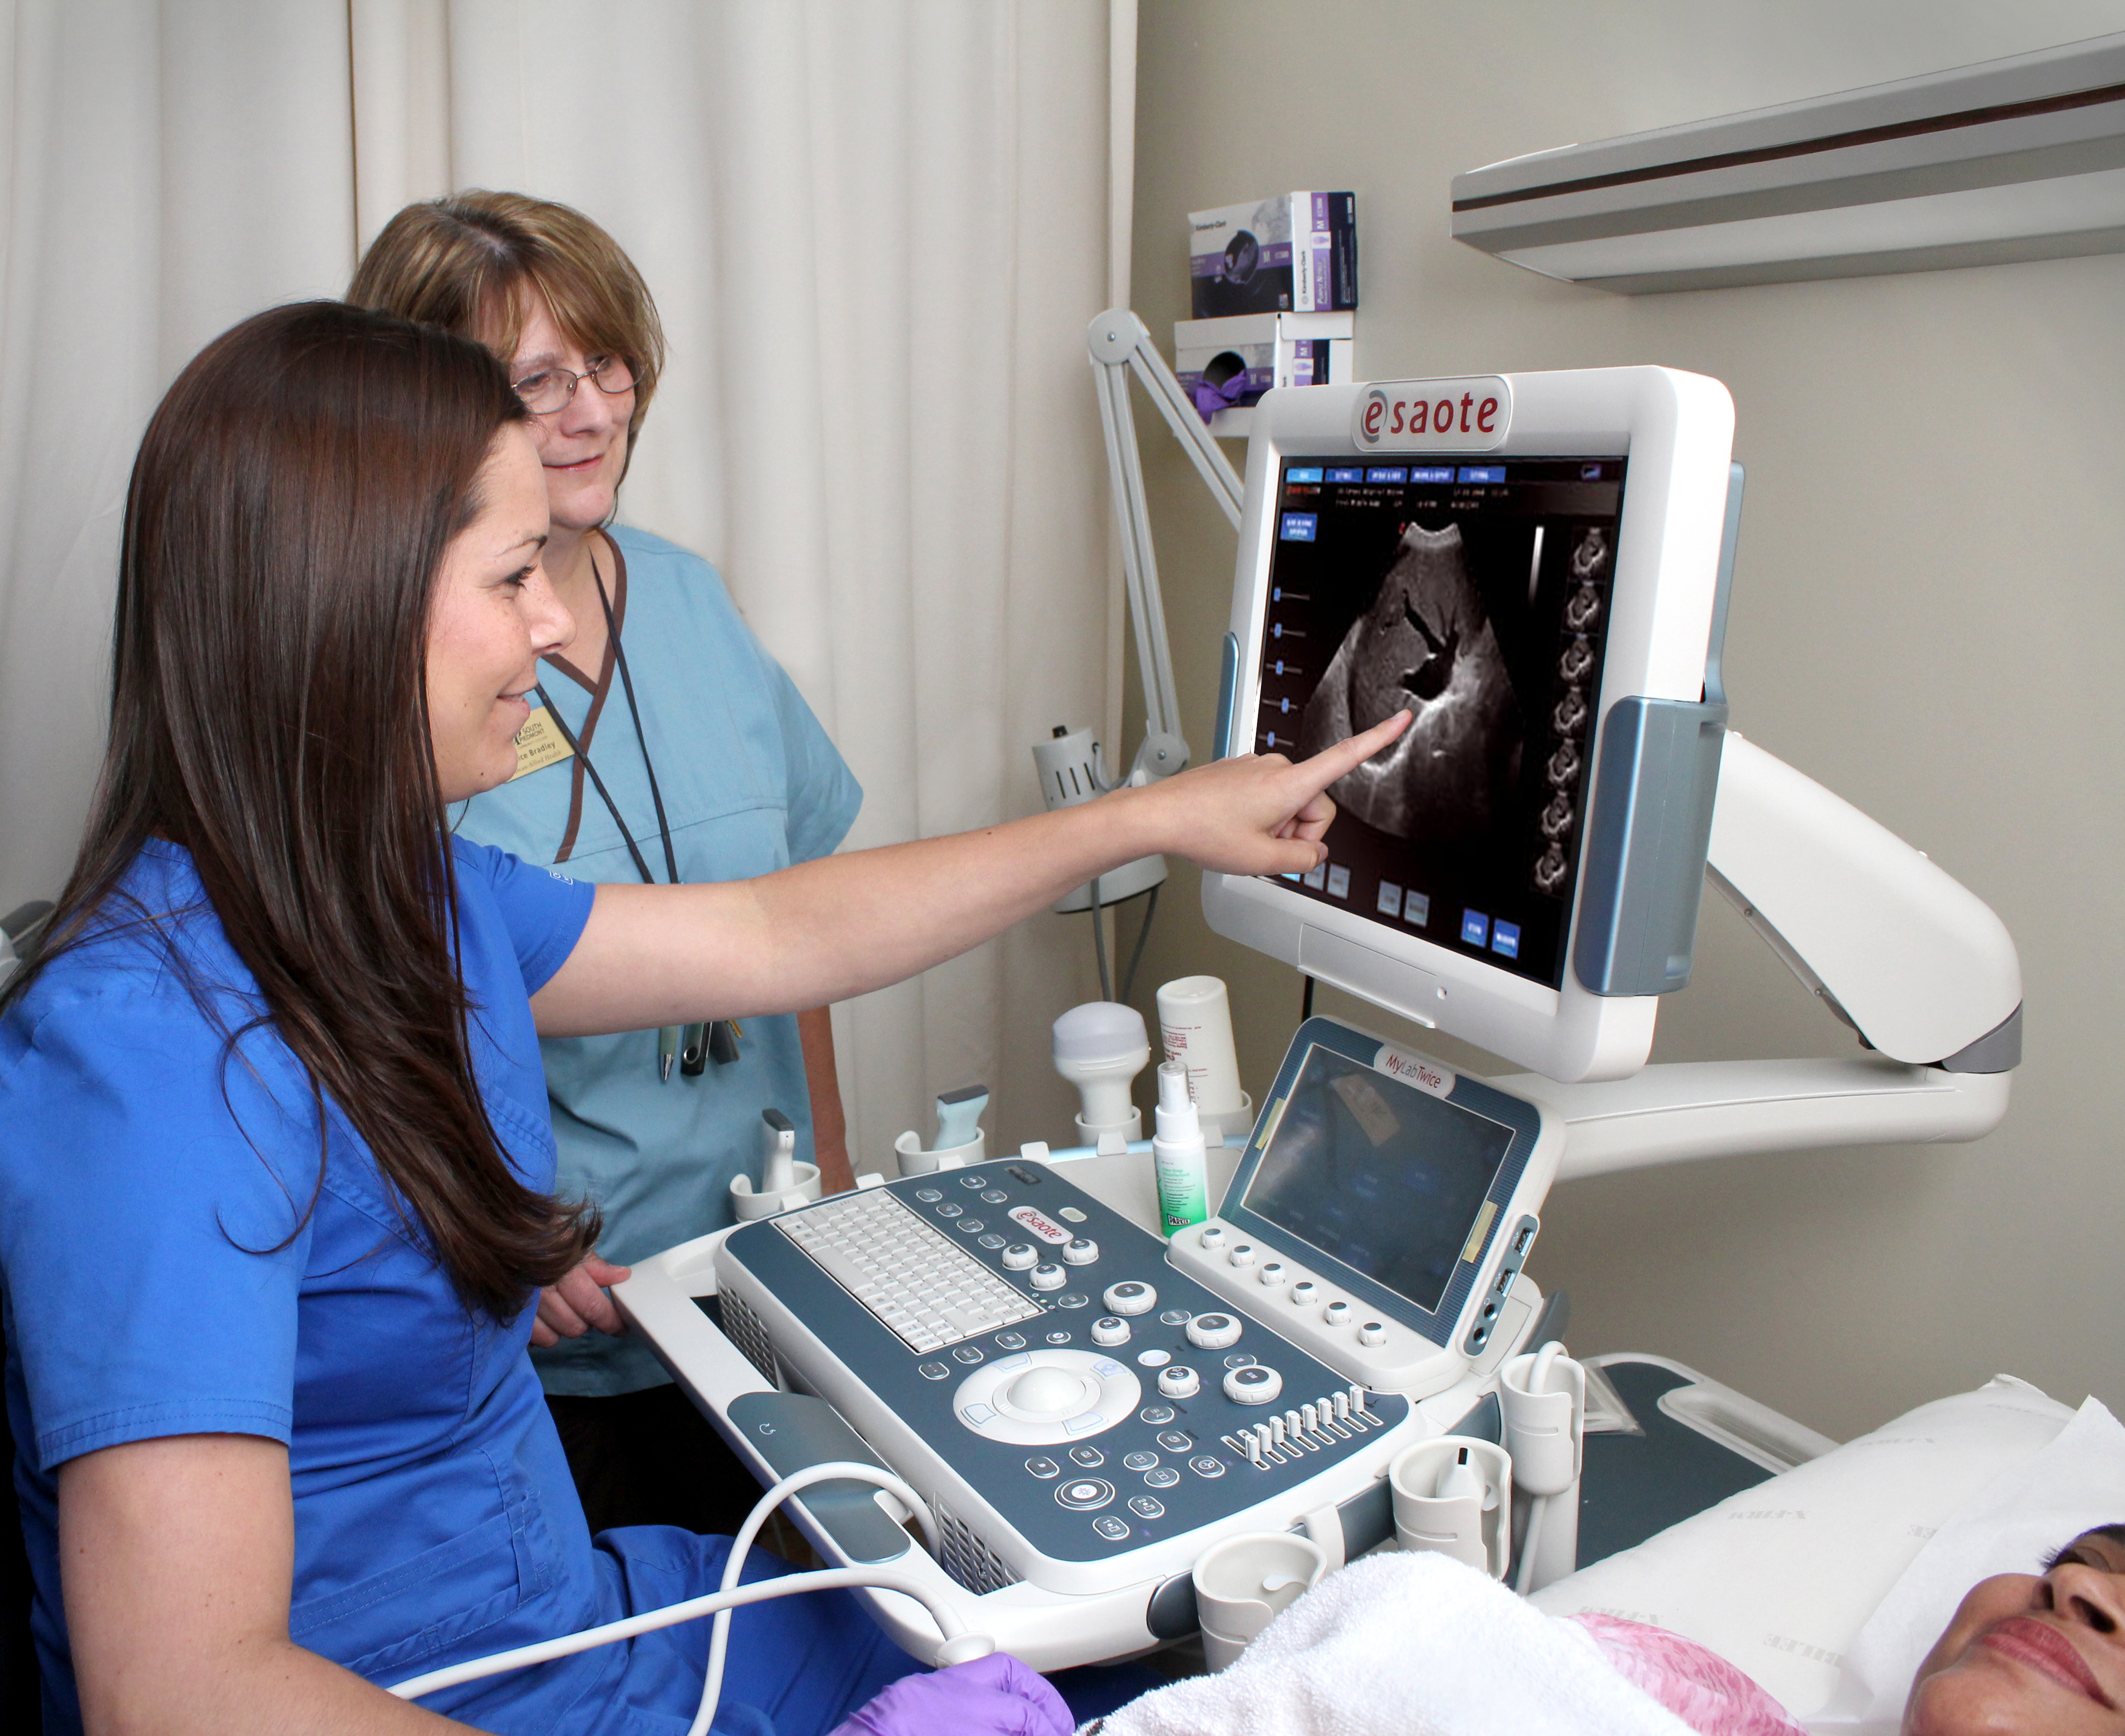 Esaote Ultrasound Technology Helps Students Improve Skills | Business Wire